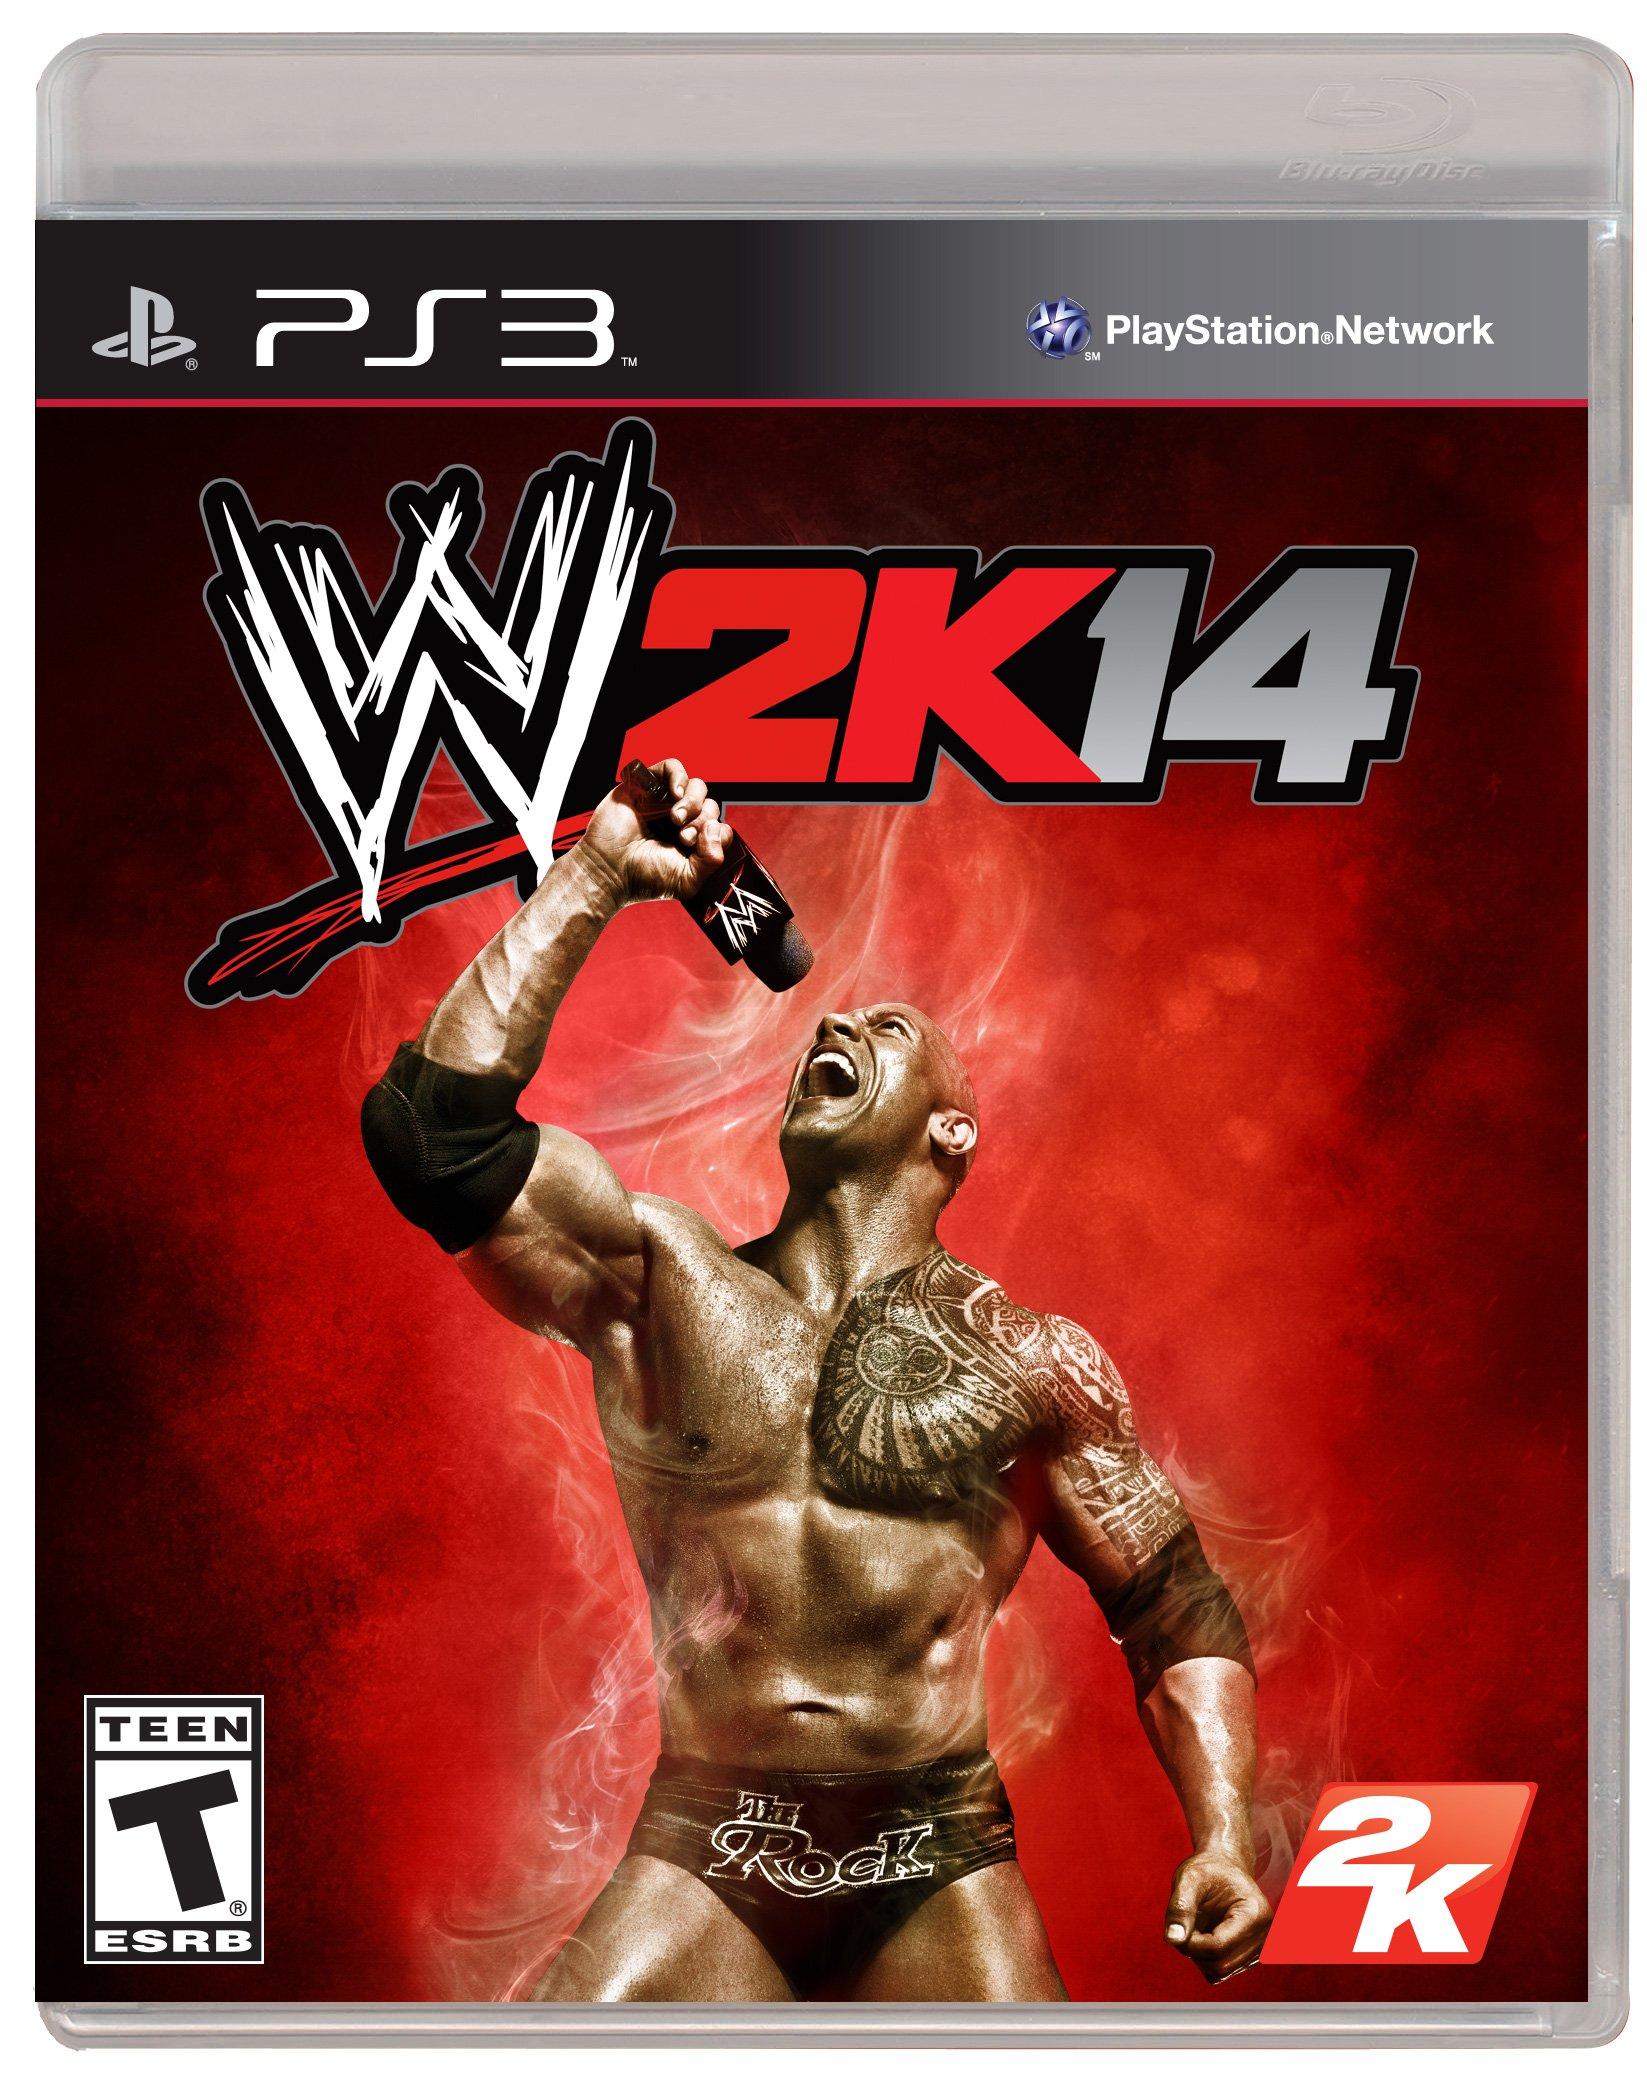 Wwe 2k14 game download for android ppsspp